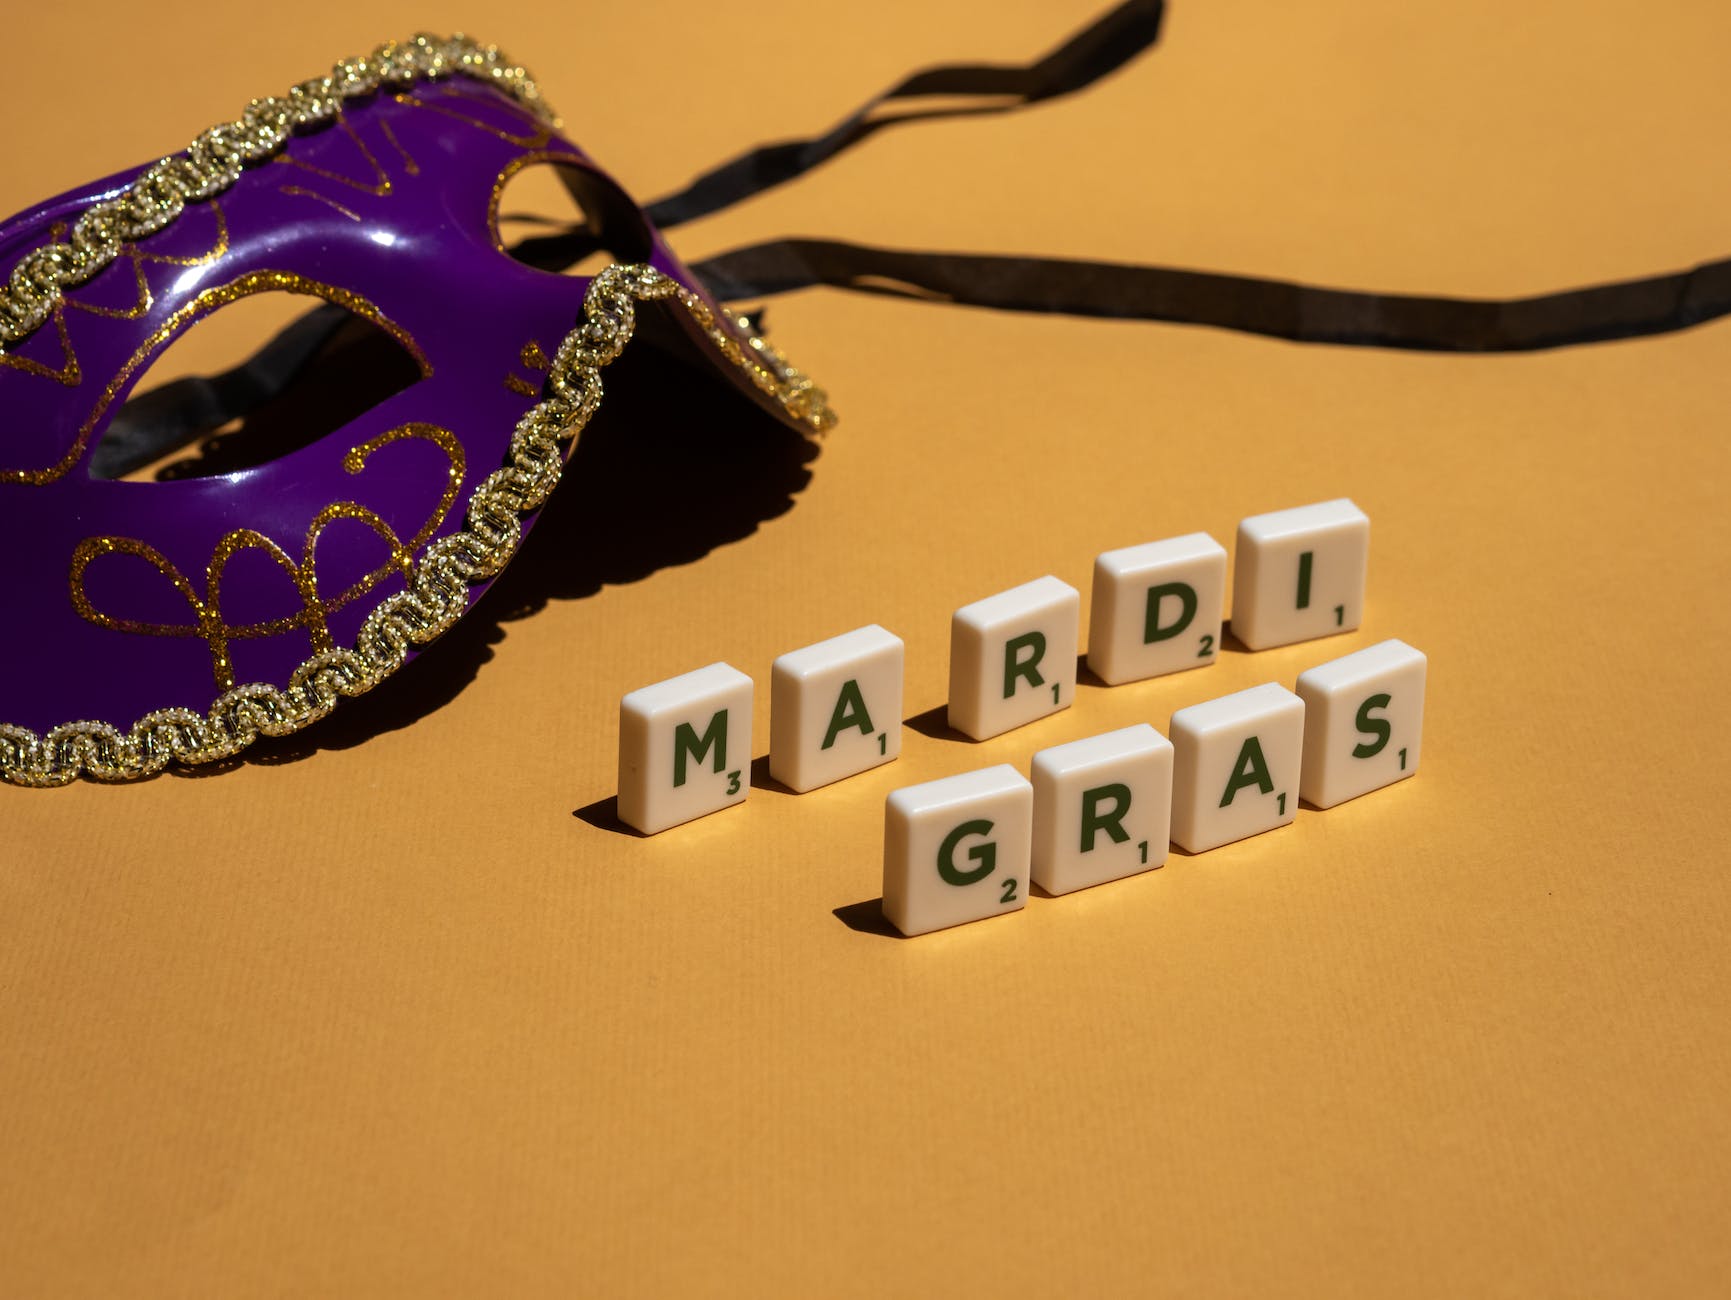 Music, coffee and Mardi Gras at Lolobee’s